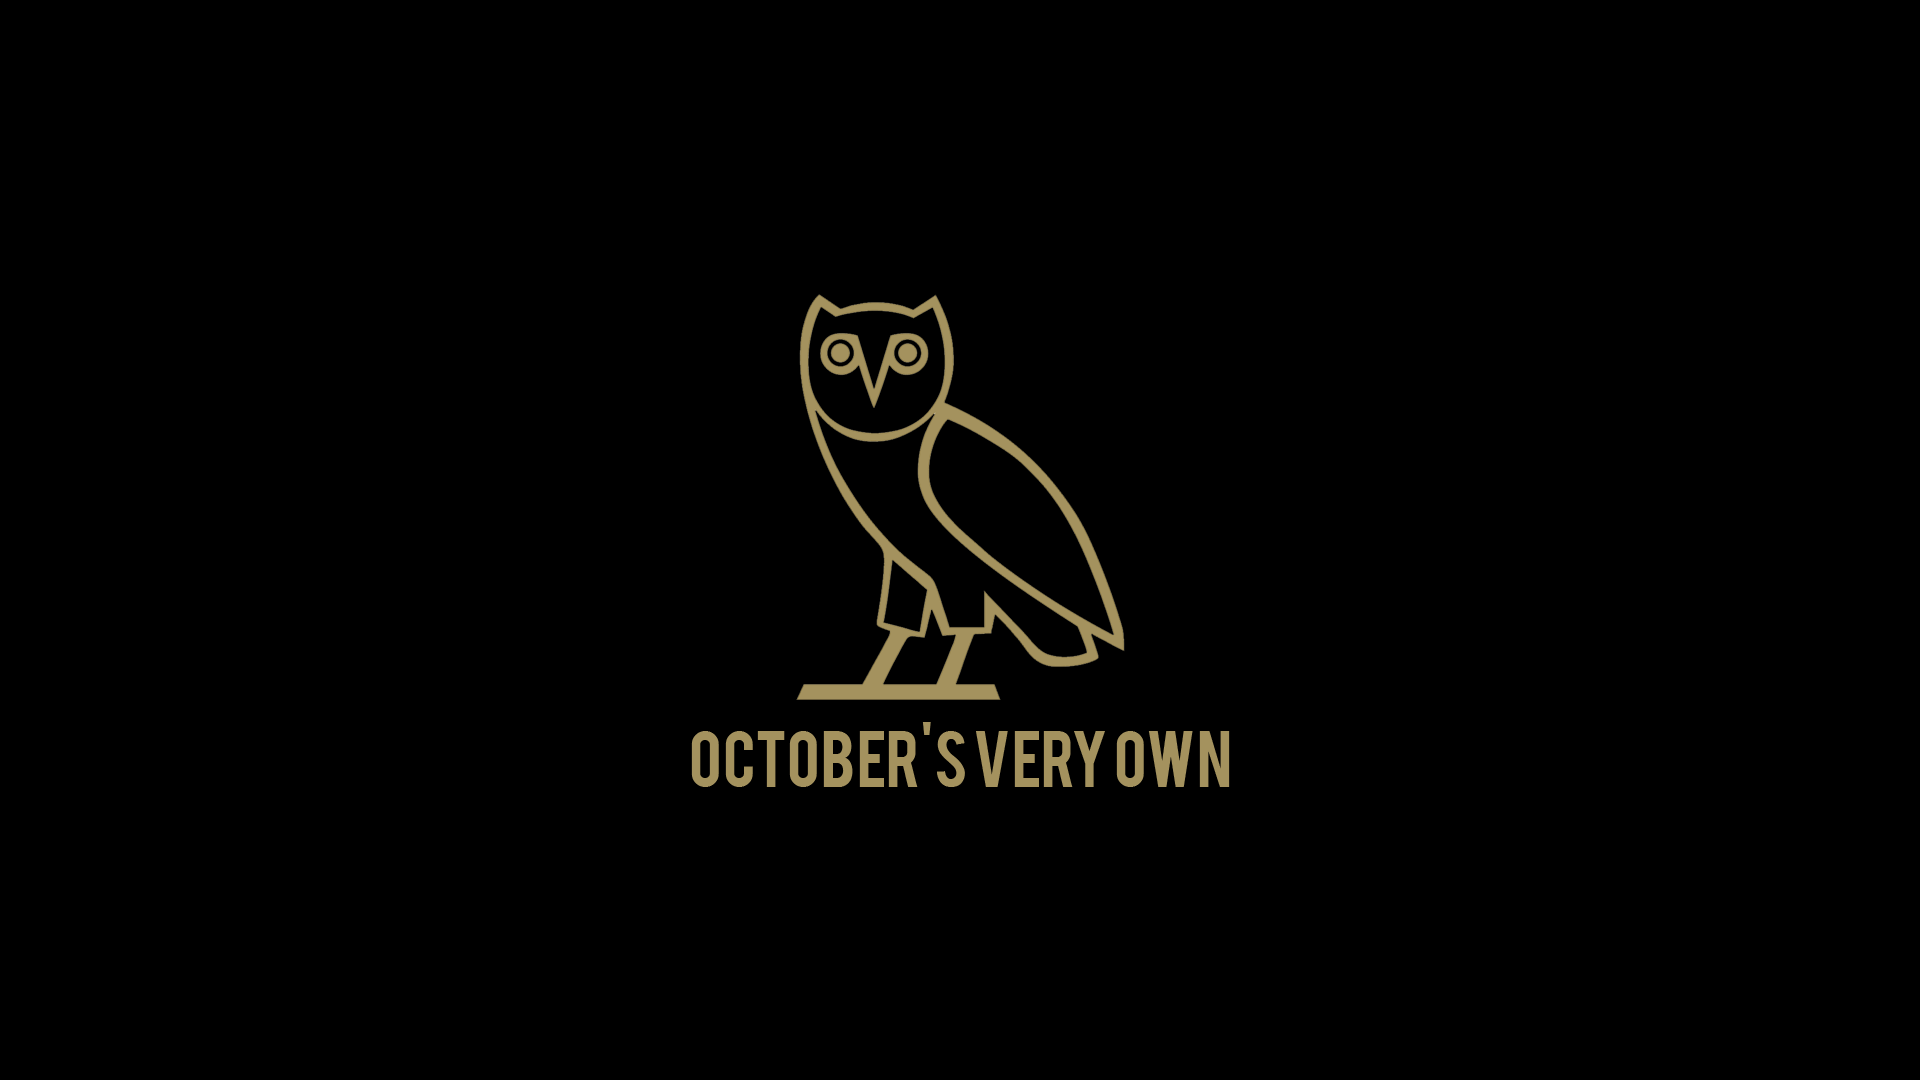 Ovo IPhone 6 Wallpaper 81 images